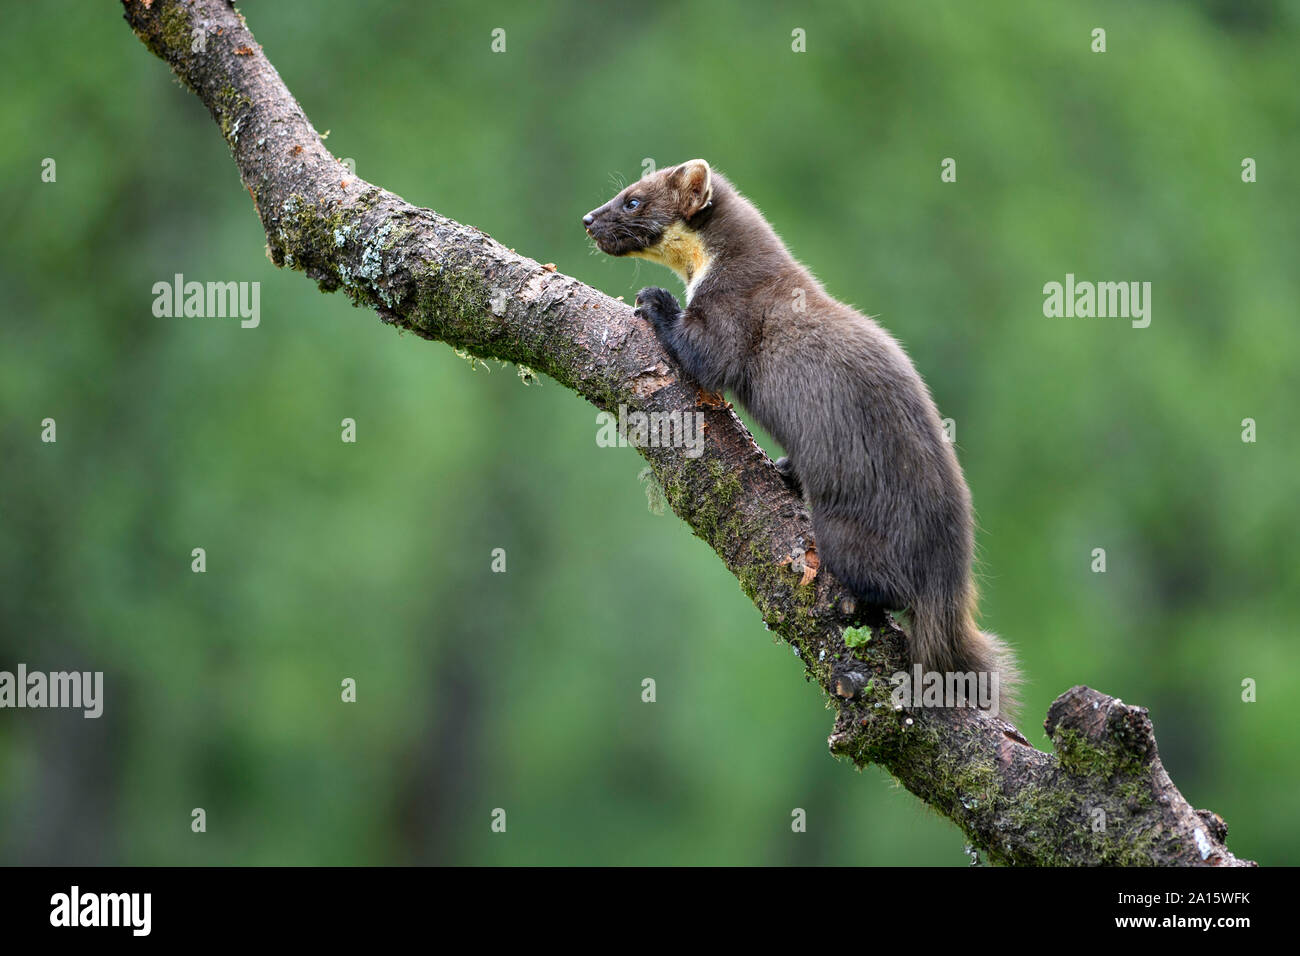 Pine marten on tree in forest at Scotland Stock Photo